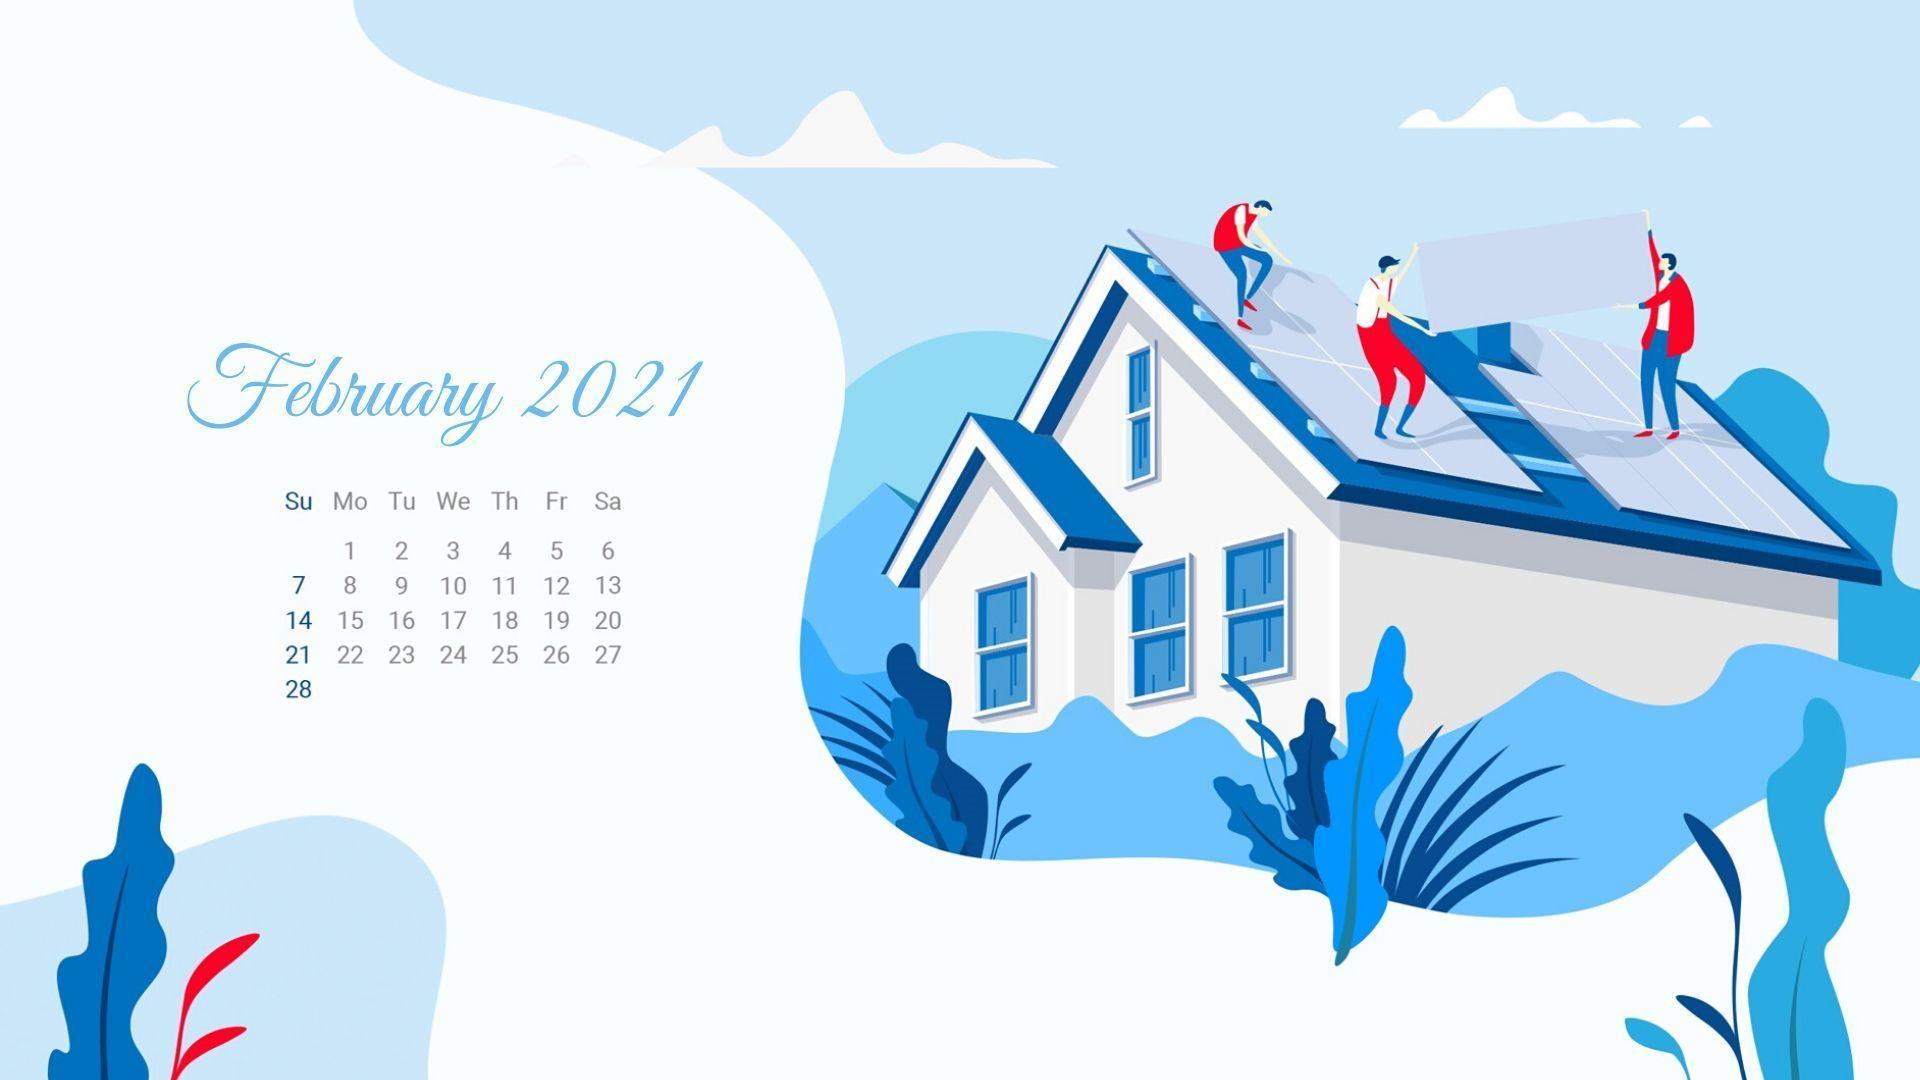 February 2021 Calendar Wallpapers Top Free February 2021 Calendar Backgrounds Wallpaperaccess Print each month separately and combine them on the wall into a quarterly planner, 3 month calendar or even a year; february 2021 calendar wallpapers top